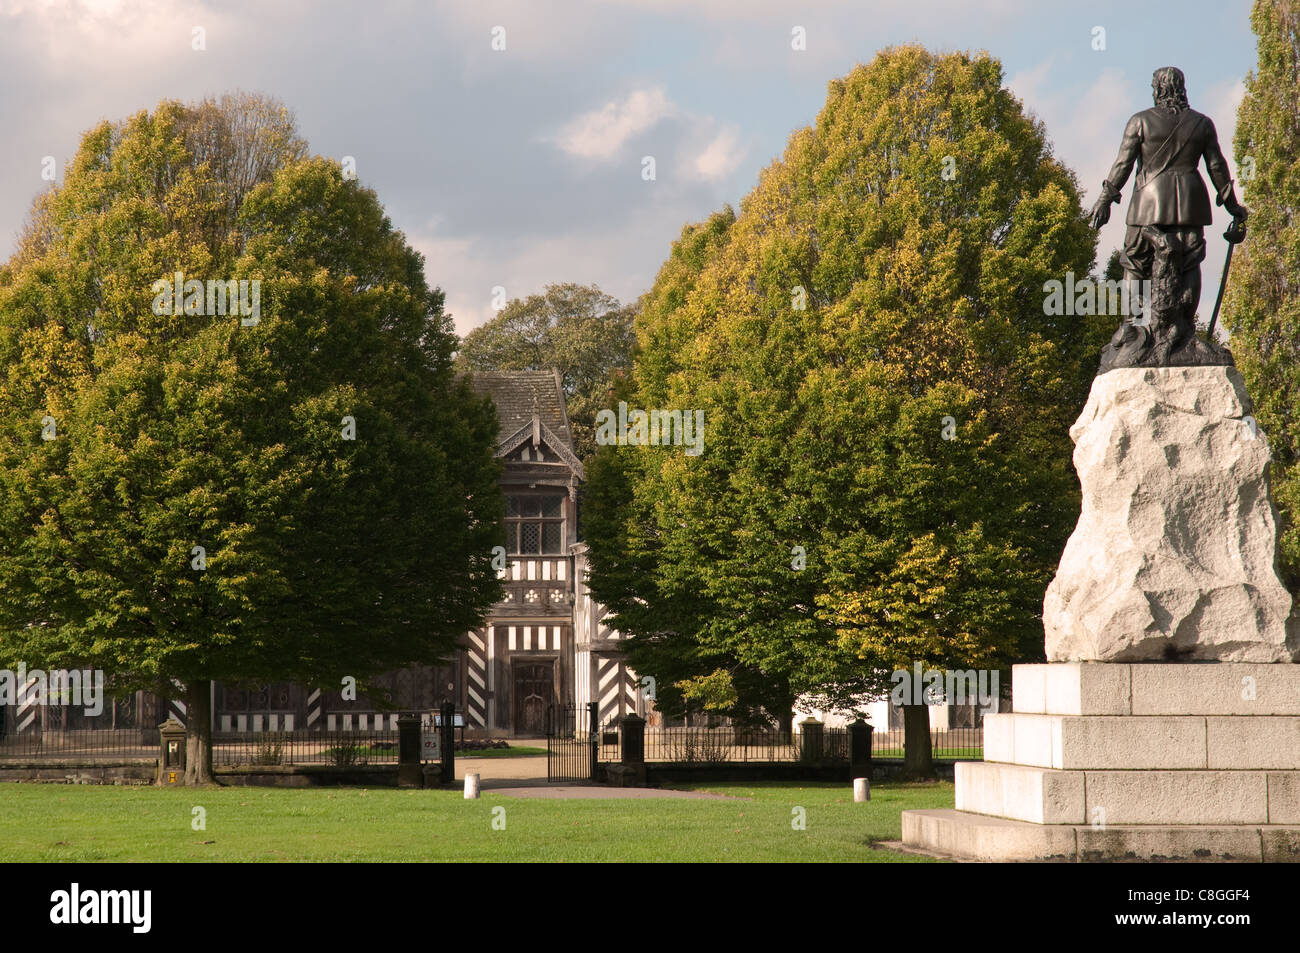 Statue of Oliver Cromwell with Wythenshawe Hall in the distance.Wythenshawe Park, Manchester. Stock Photo